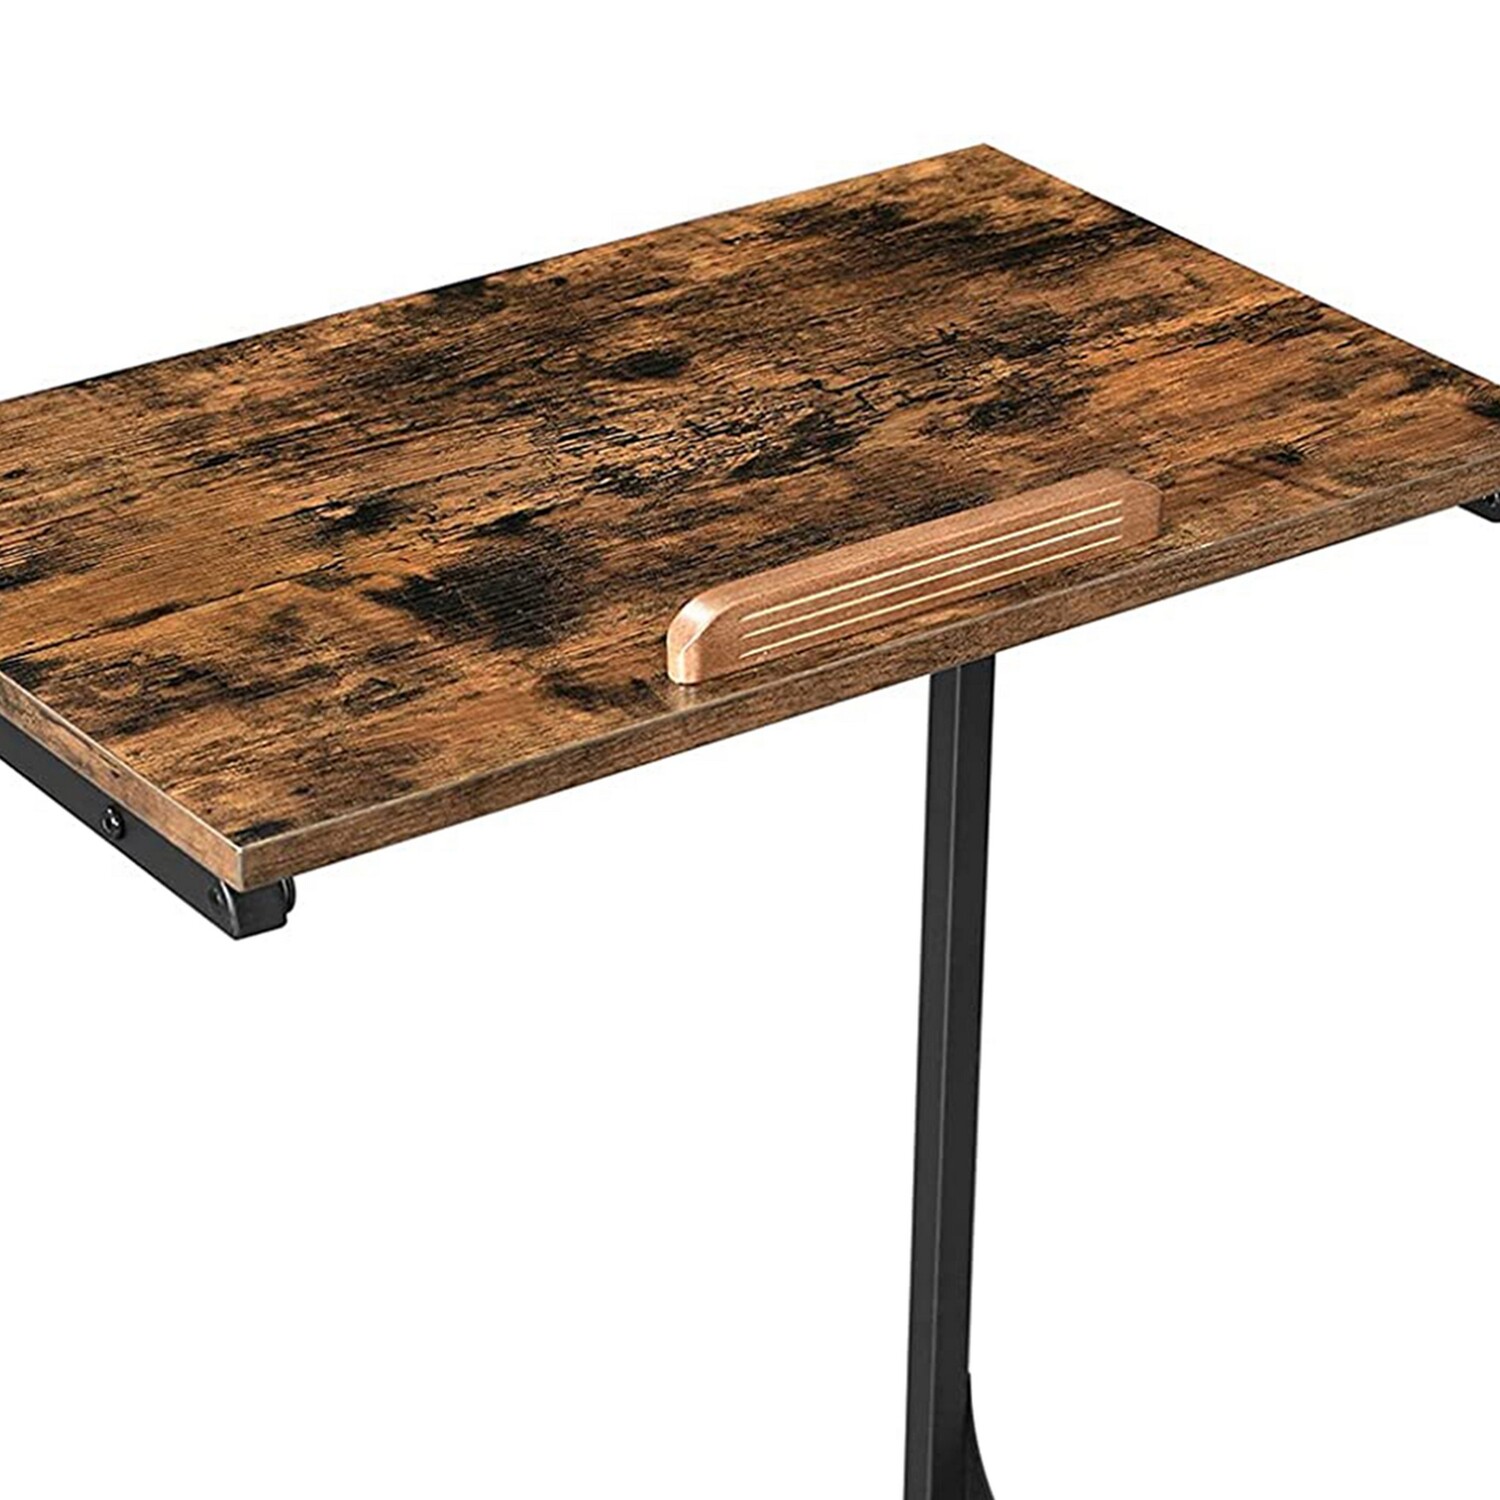 Metal Laptop Table with Tilting Wooden Top and Grains, Brown and Black - image 2 of 5